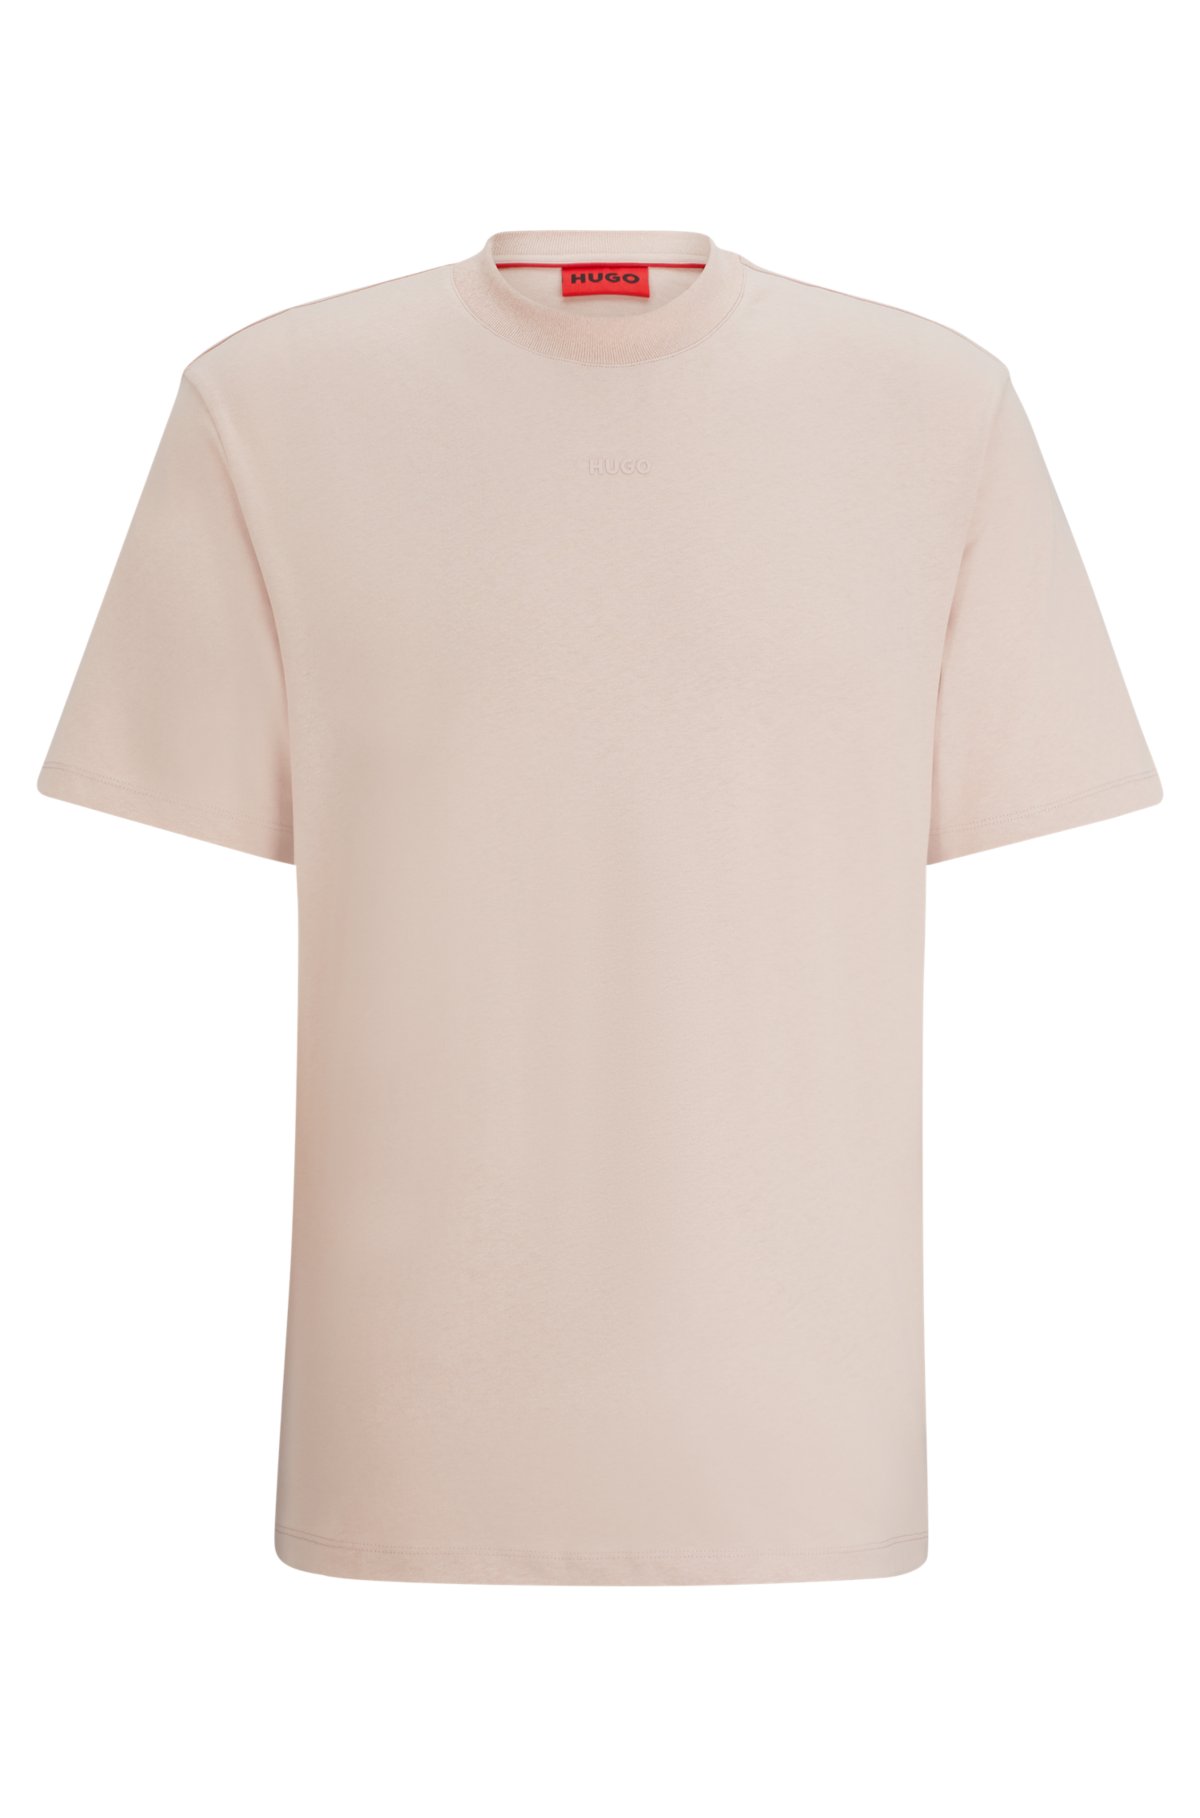 Relaxed-fit T-shirt in cotton with logo print, light pink